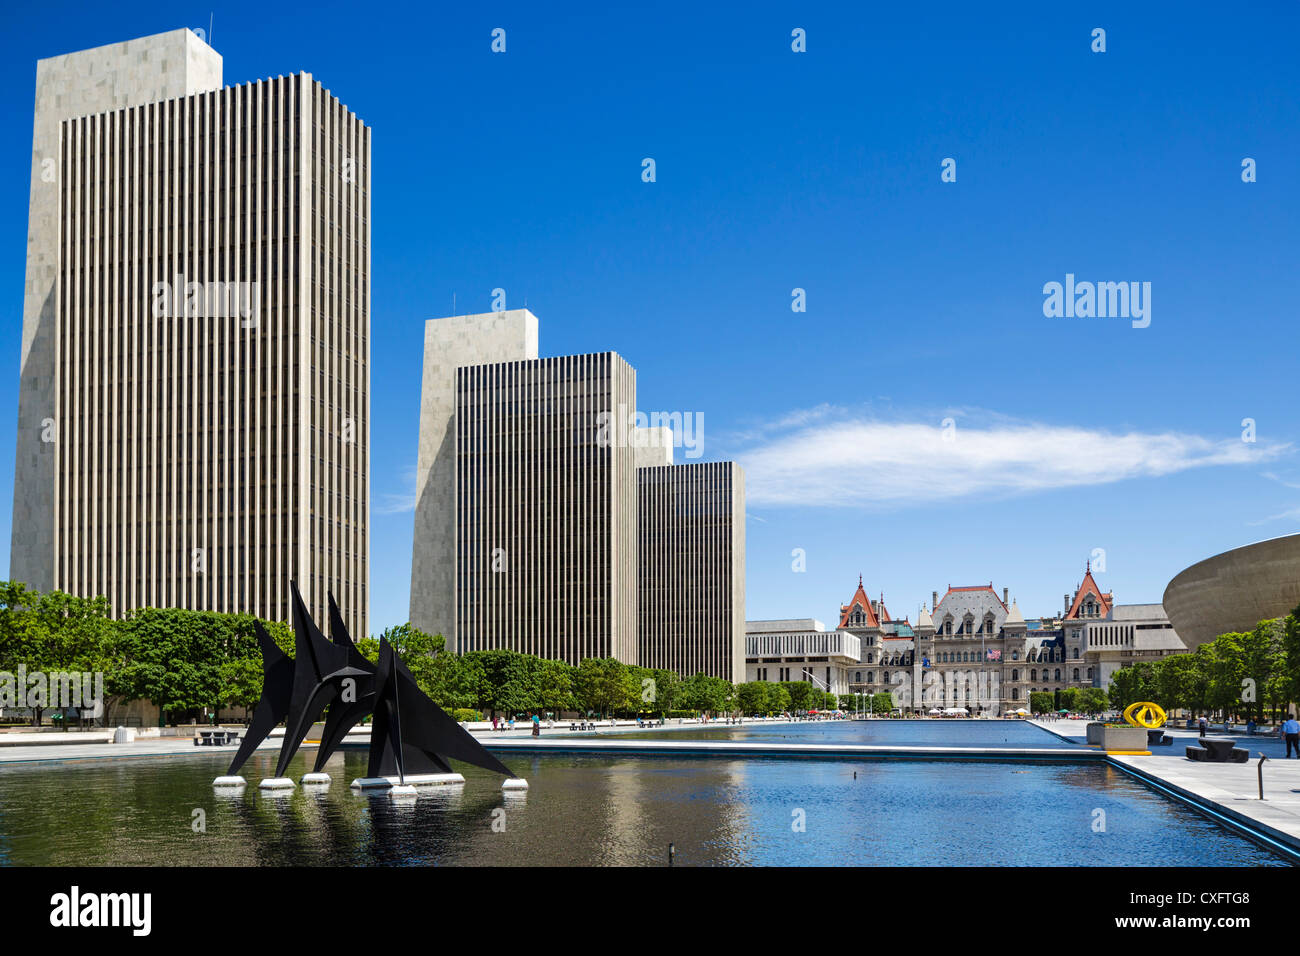 Le Nelson A. Rockefeller Empire State Plaza à vers State Capitol avec 'l'Œuf' à droite, Albany, New York State, USA Banque D'Images